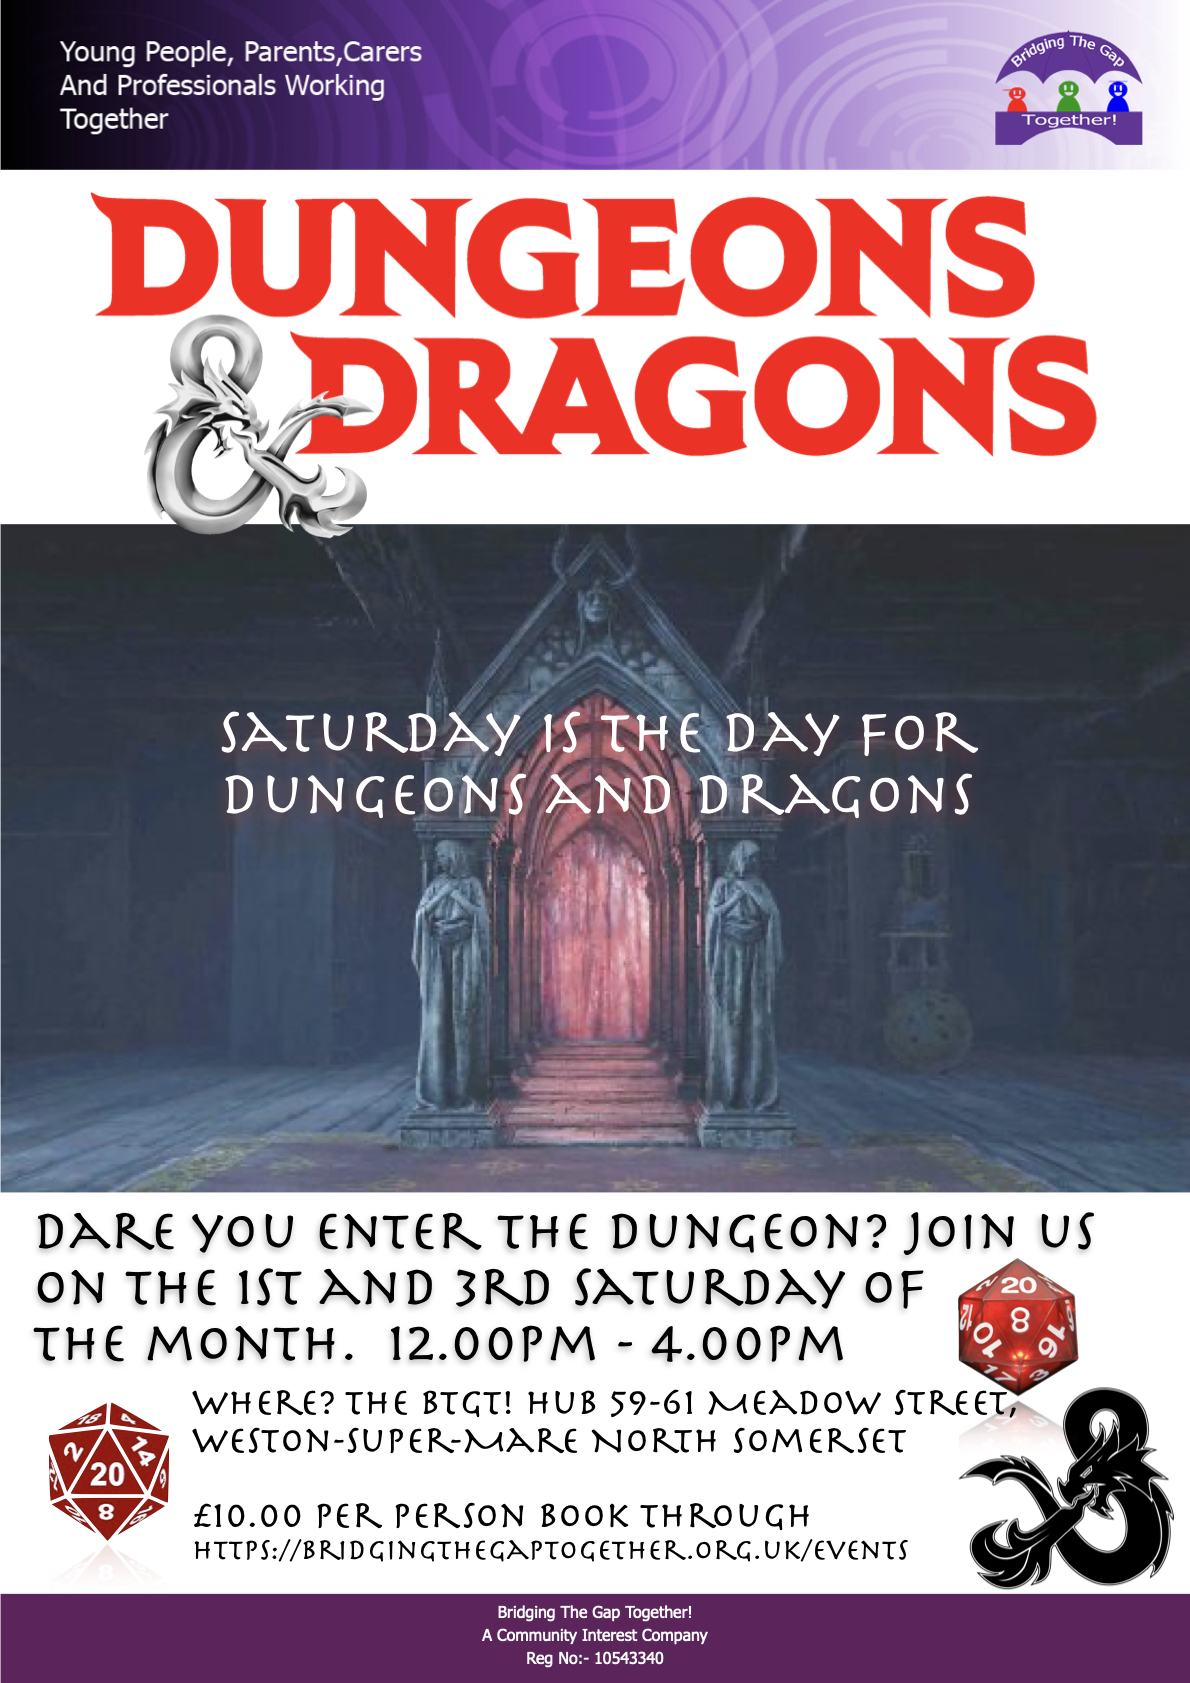 Dungeons & Dragons Poster giving dates and times of the event